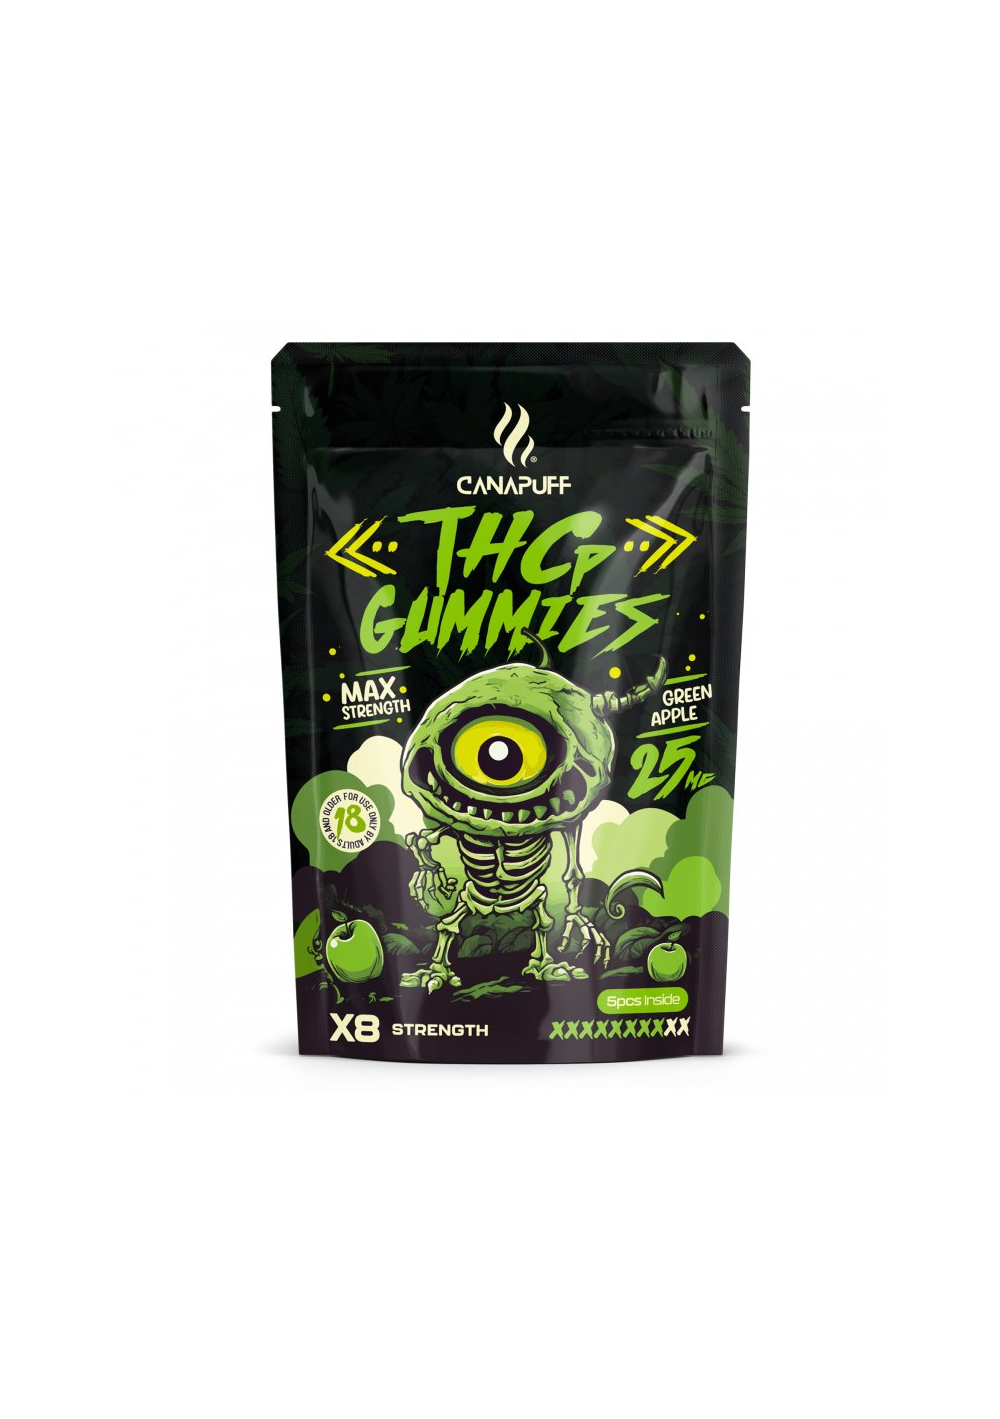 THC-P Green Apple Gummies, 5 pcs, 25mg THCP - Extra Strong - Canapuff